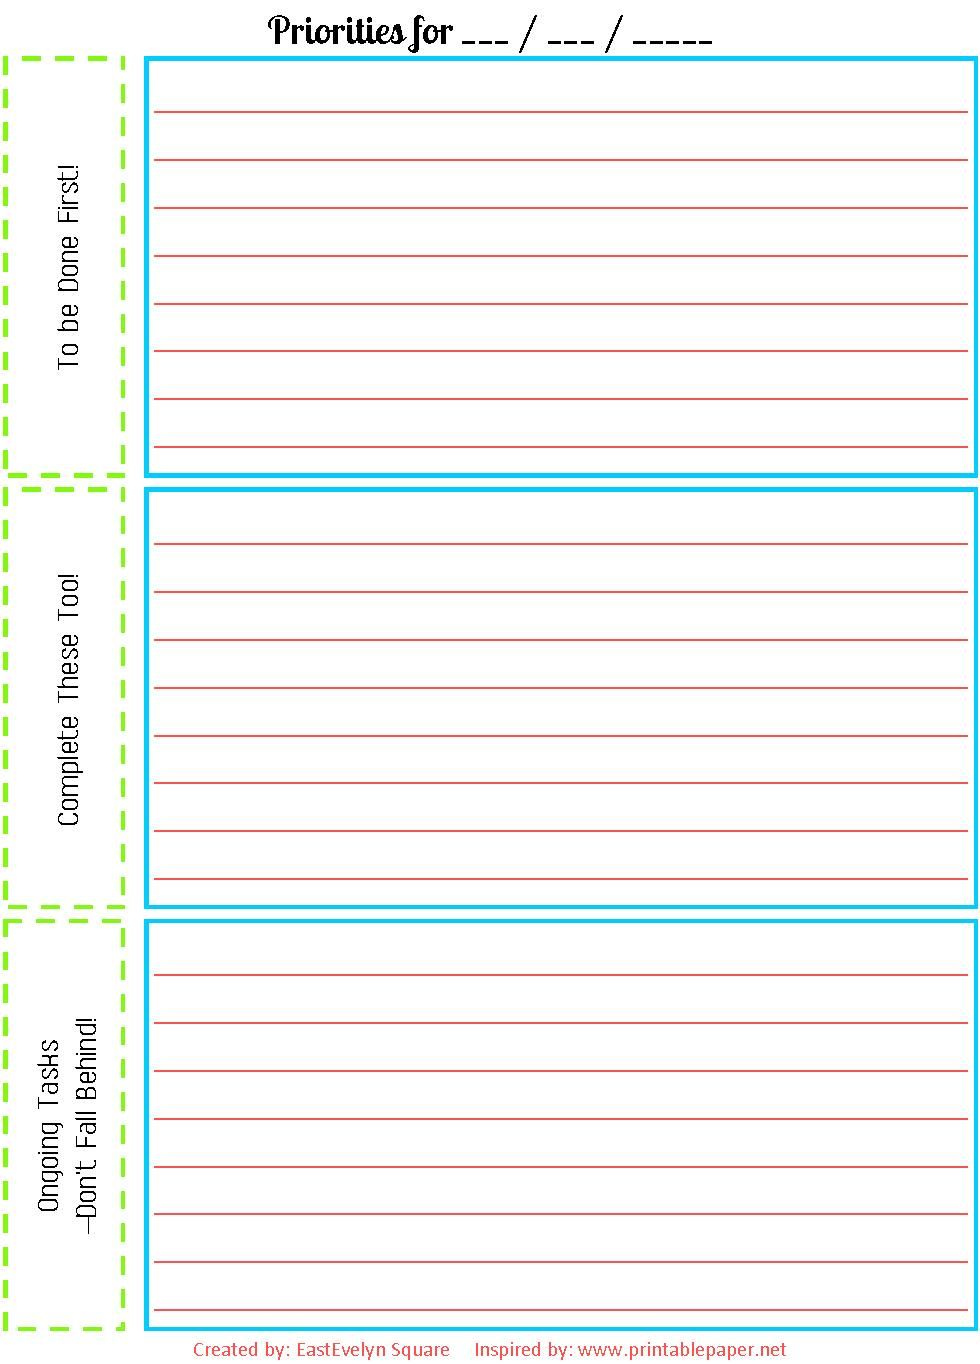 EastEvelyn Square Free Printable Priority To Do List Free Printables 